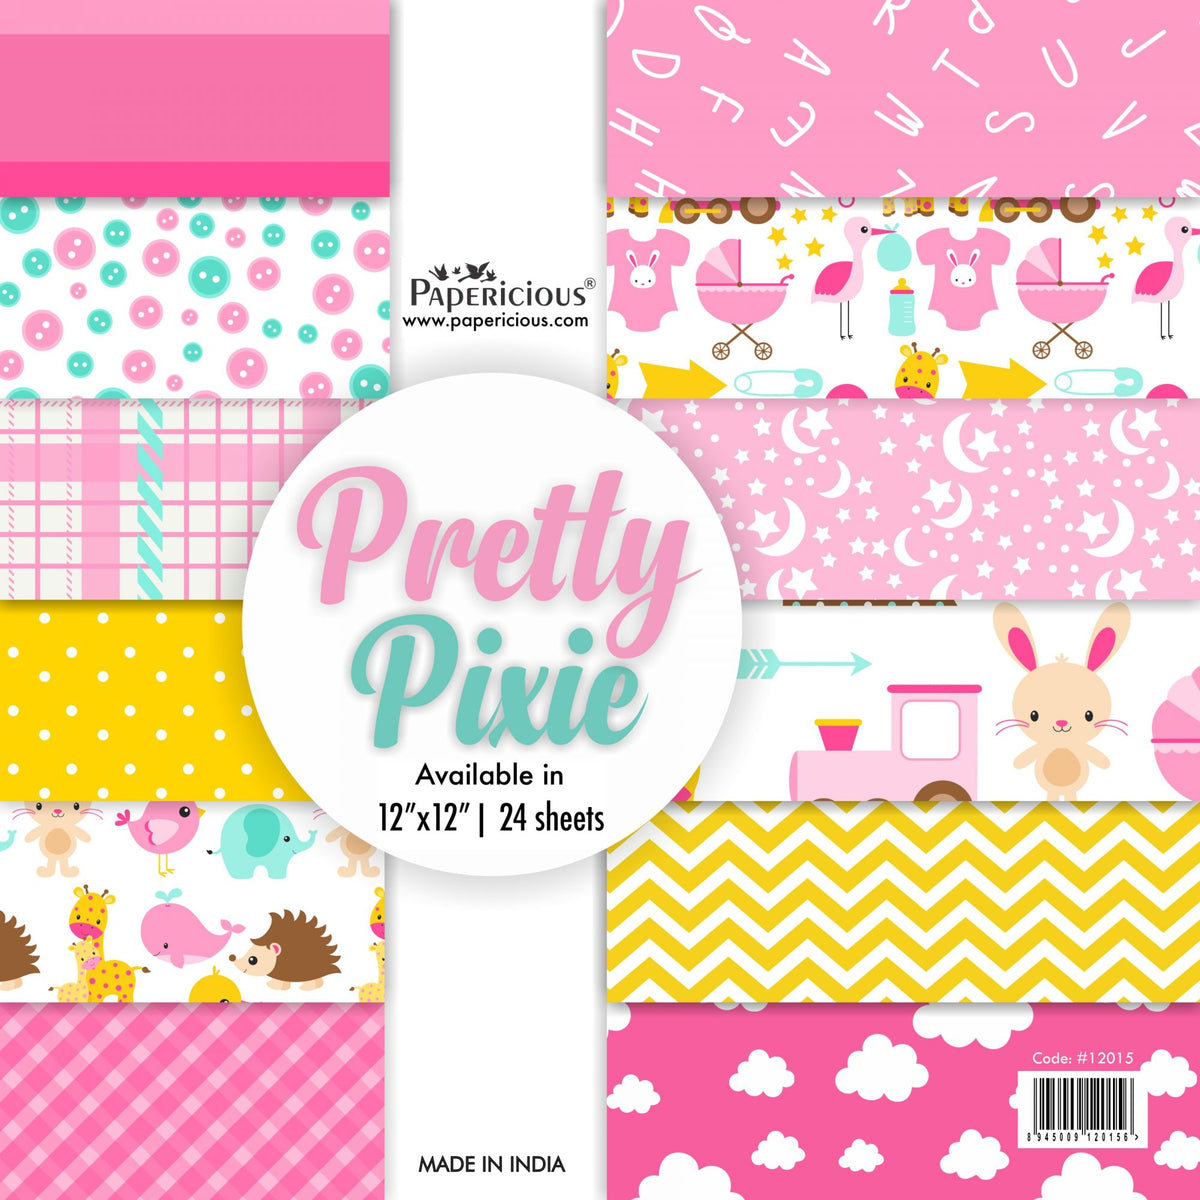 PAPERICIOUS - Pretty Pixie -  Designer Pattern Printed Scrapbook Papers / 24 sheets